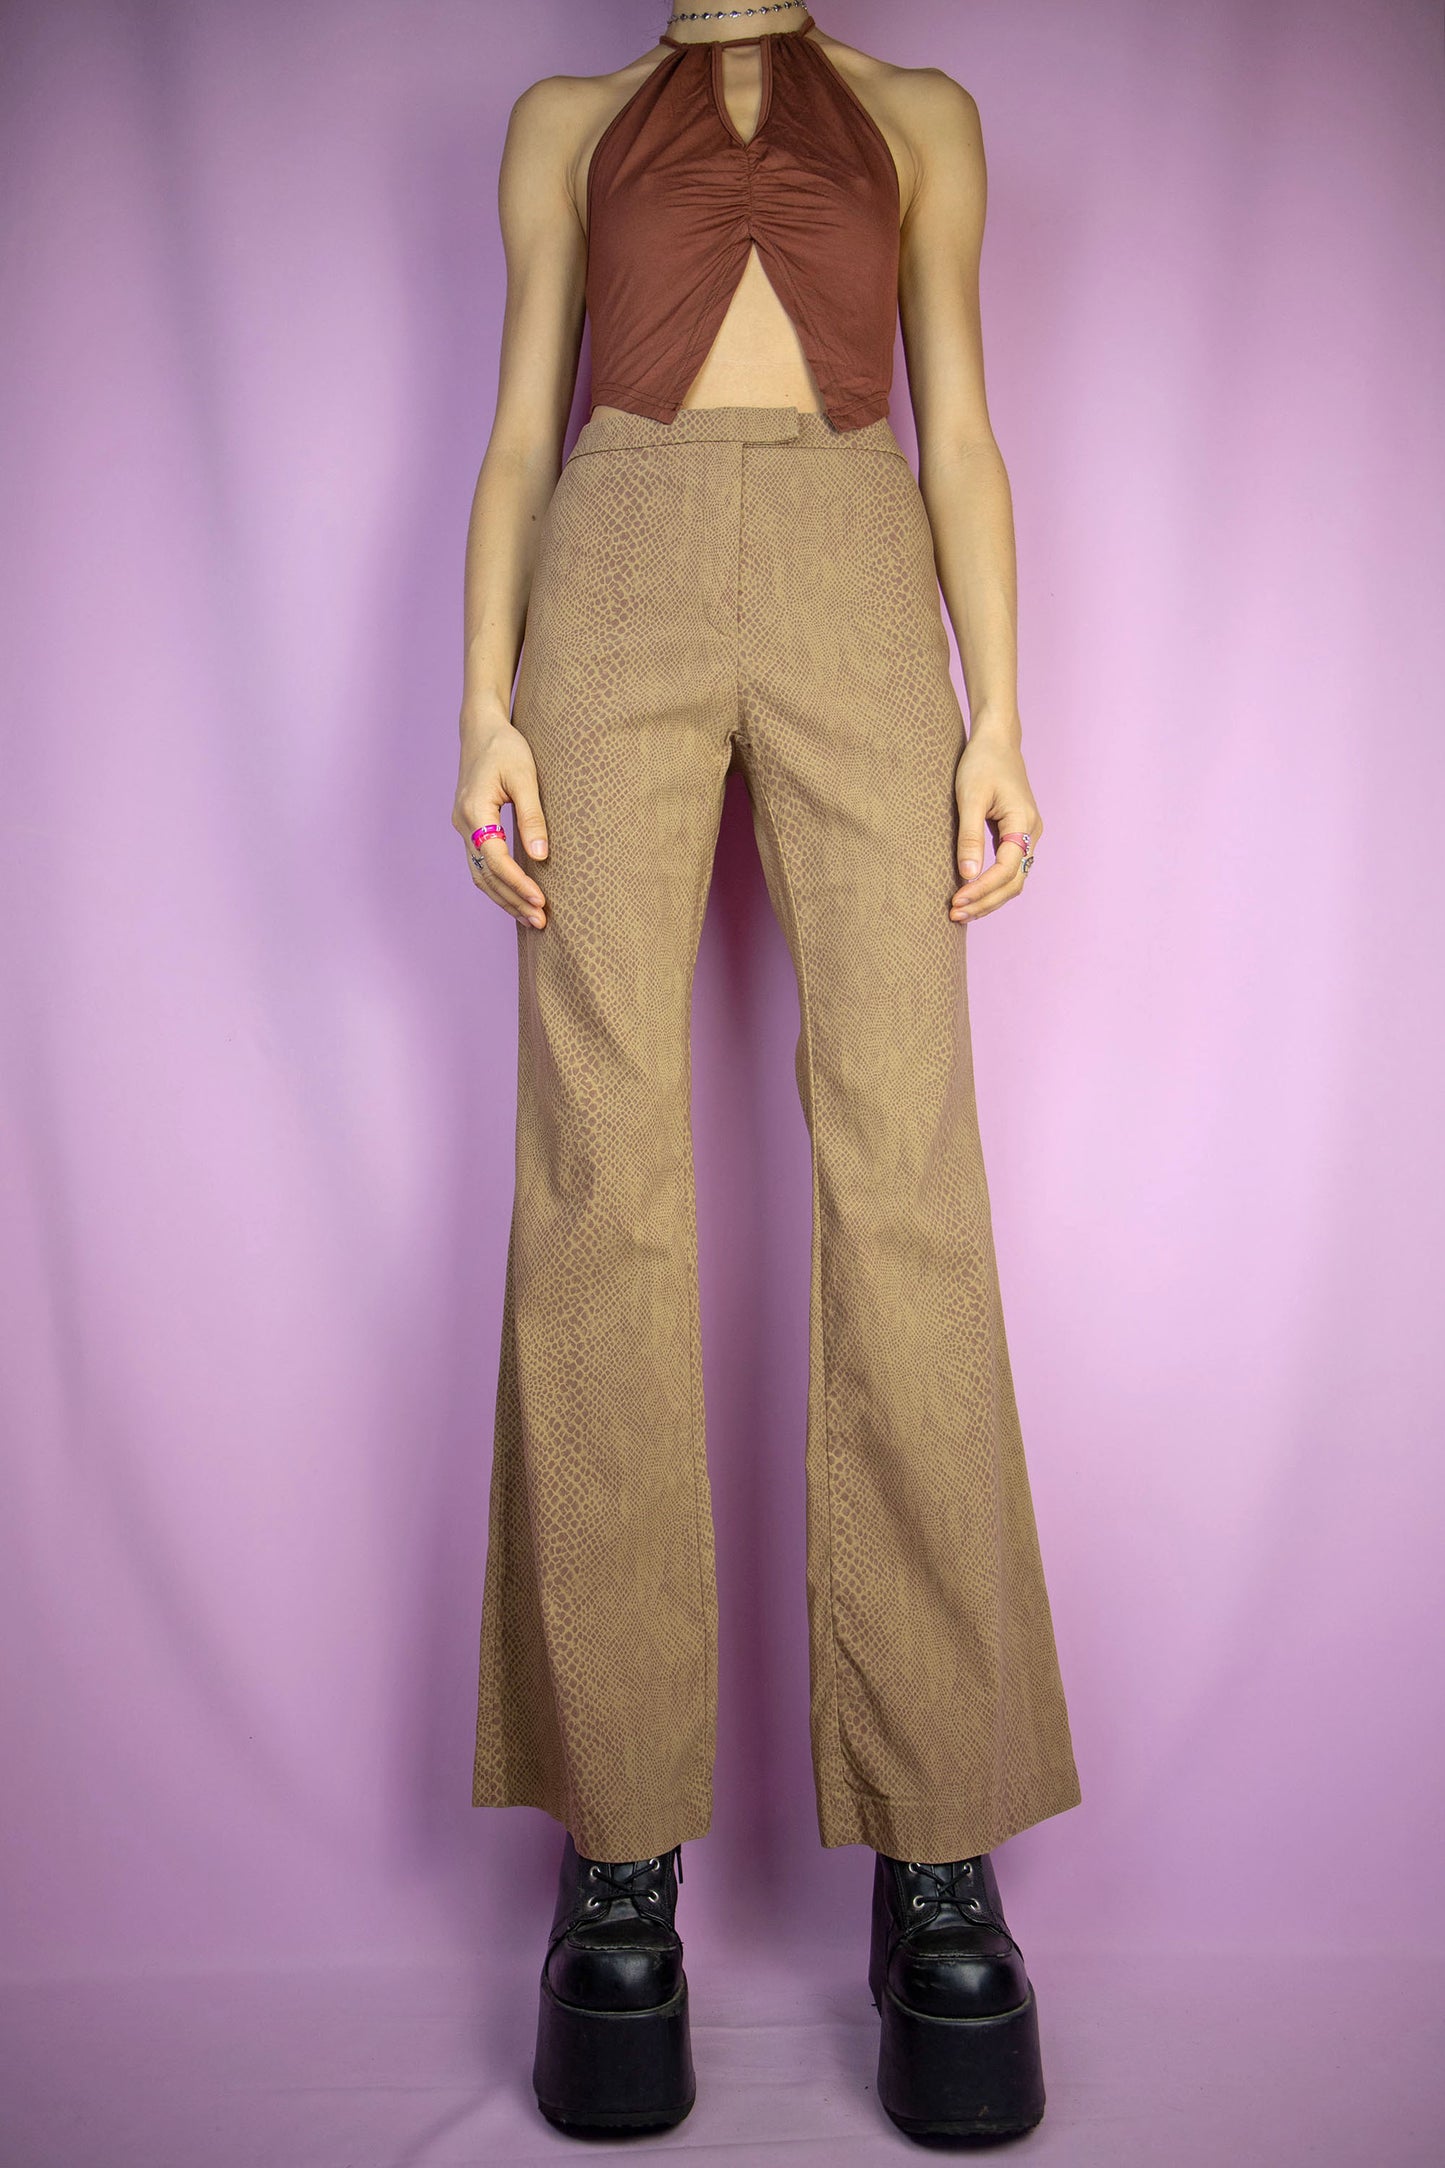 The Vintage Y2K Brown Croc Flare Pants feature a brown, stretchy fabric with a crocodile animal print and a front zipper closure. These iconic cyber party night festival trousers capture the flair of the 2000s.